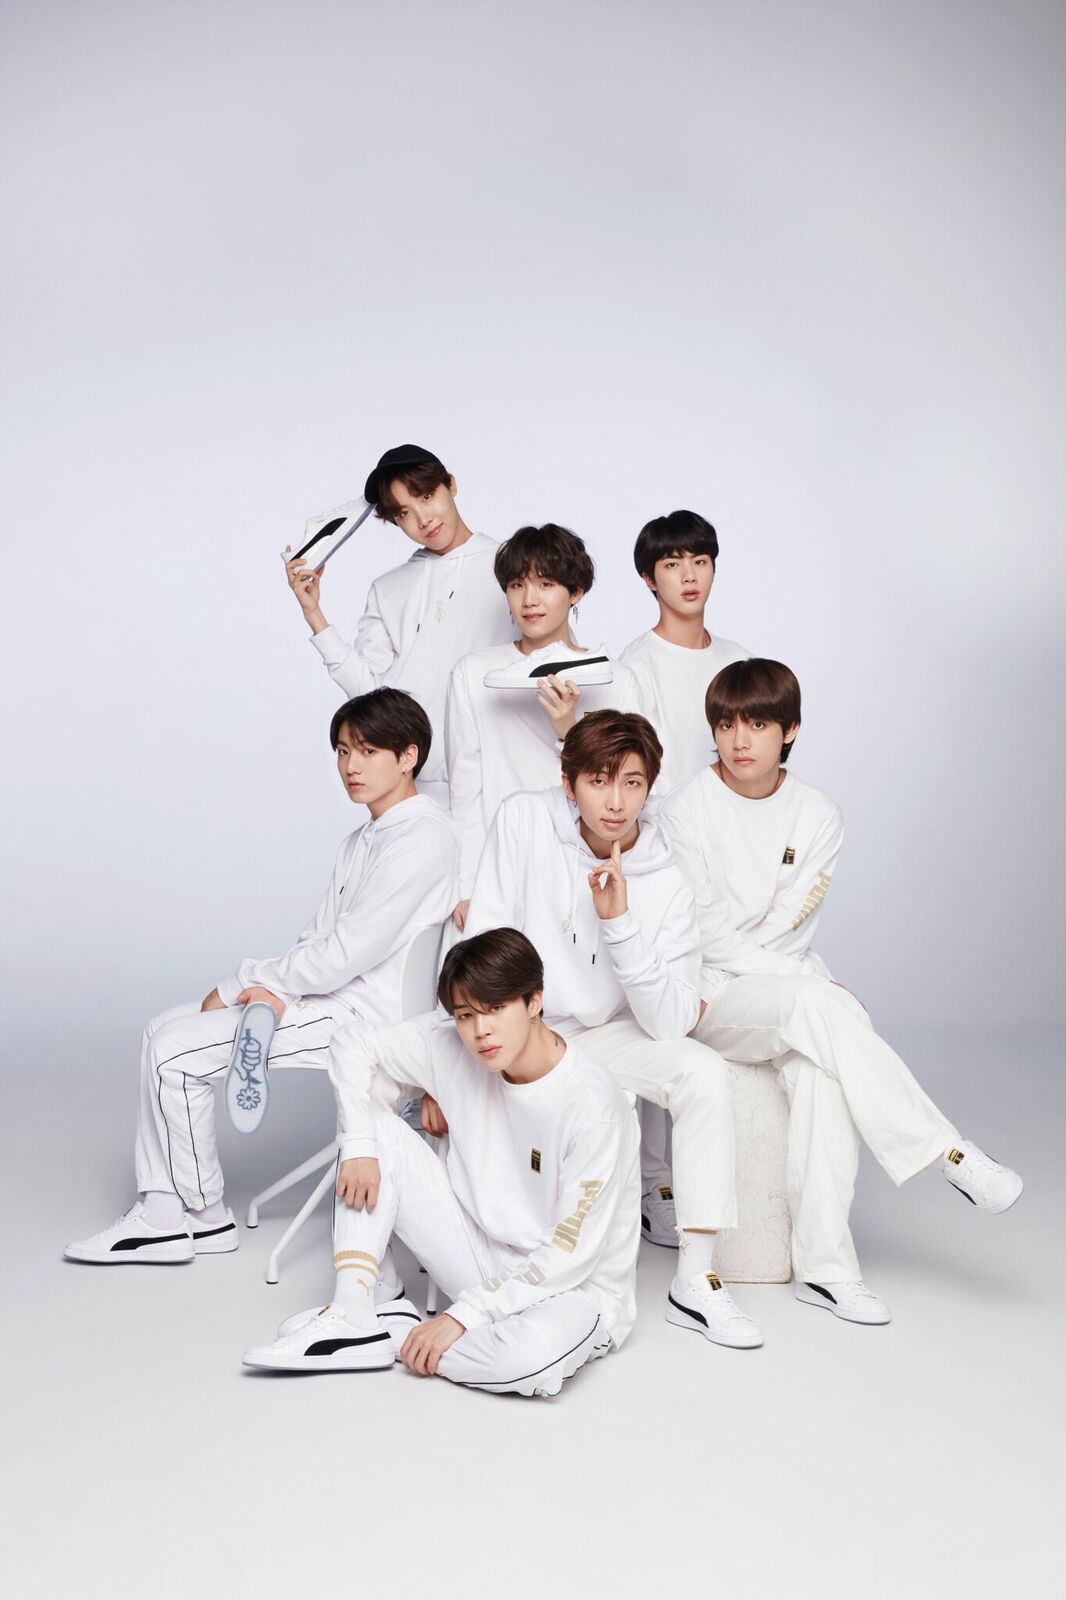 This August, the PUMA x BTS Collection 